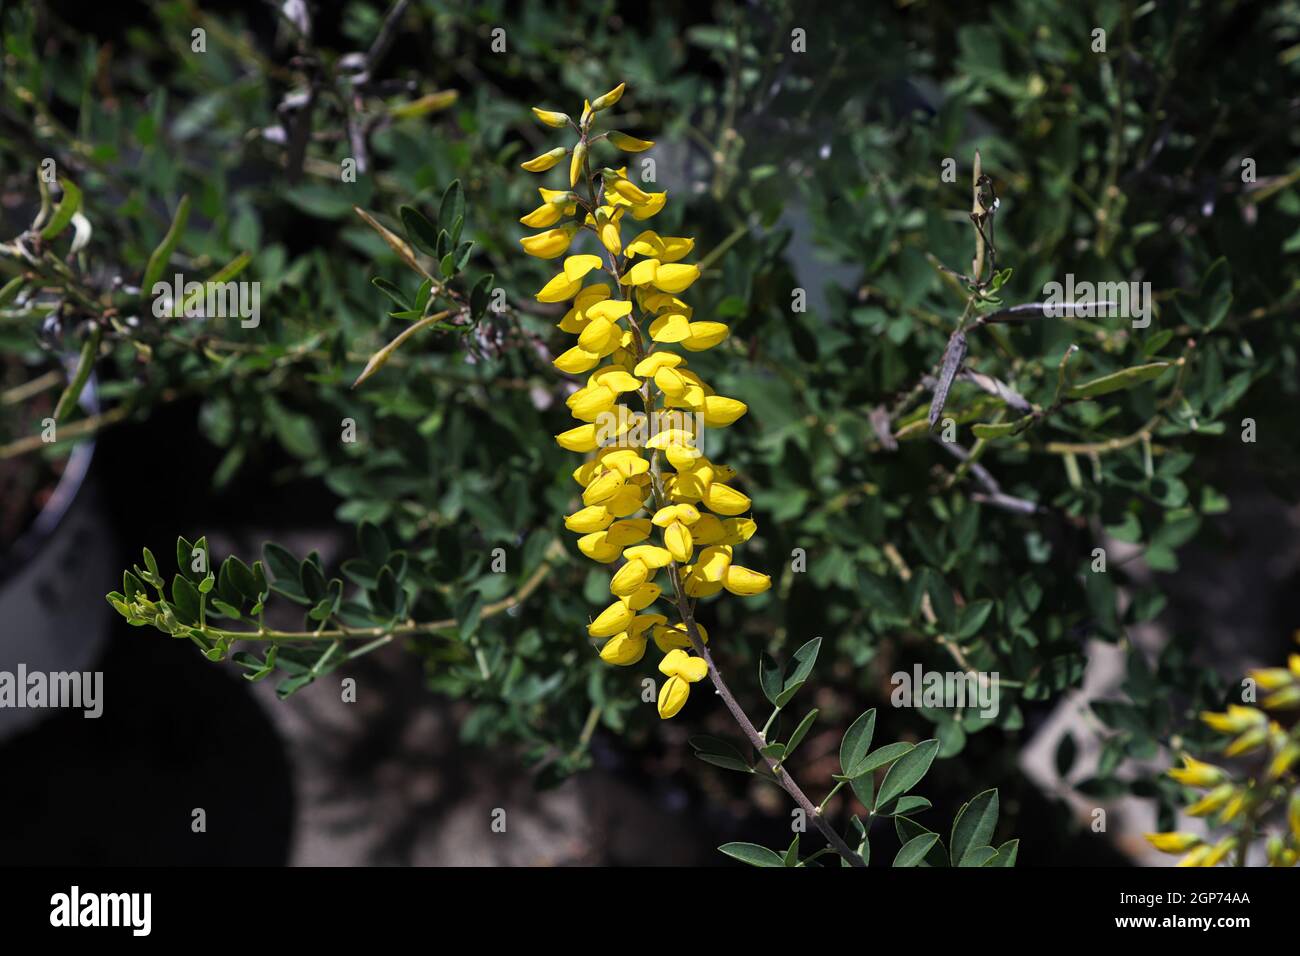 A delicate branch of yellow flowers on Cybi Broom Shrub Stock Photo